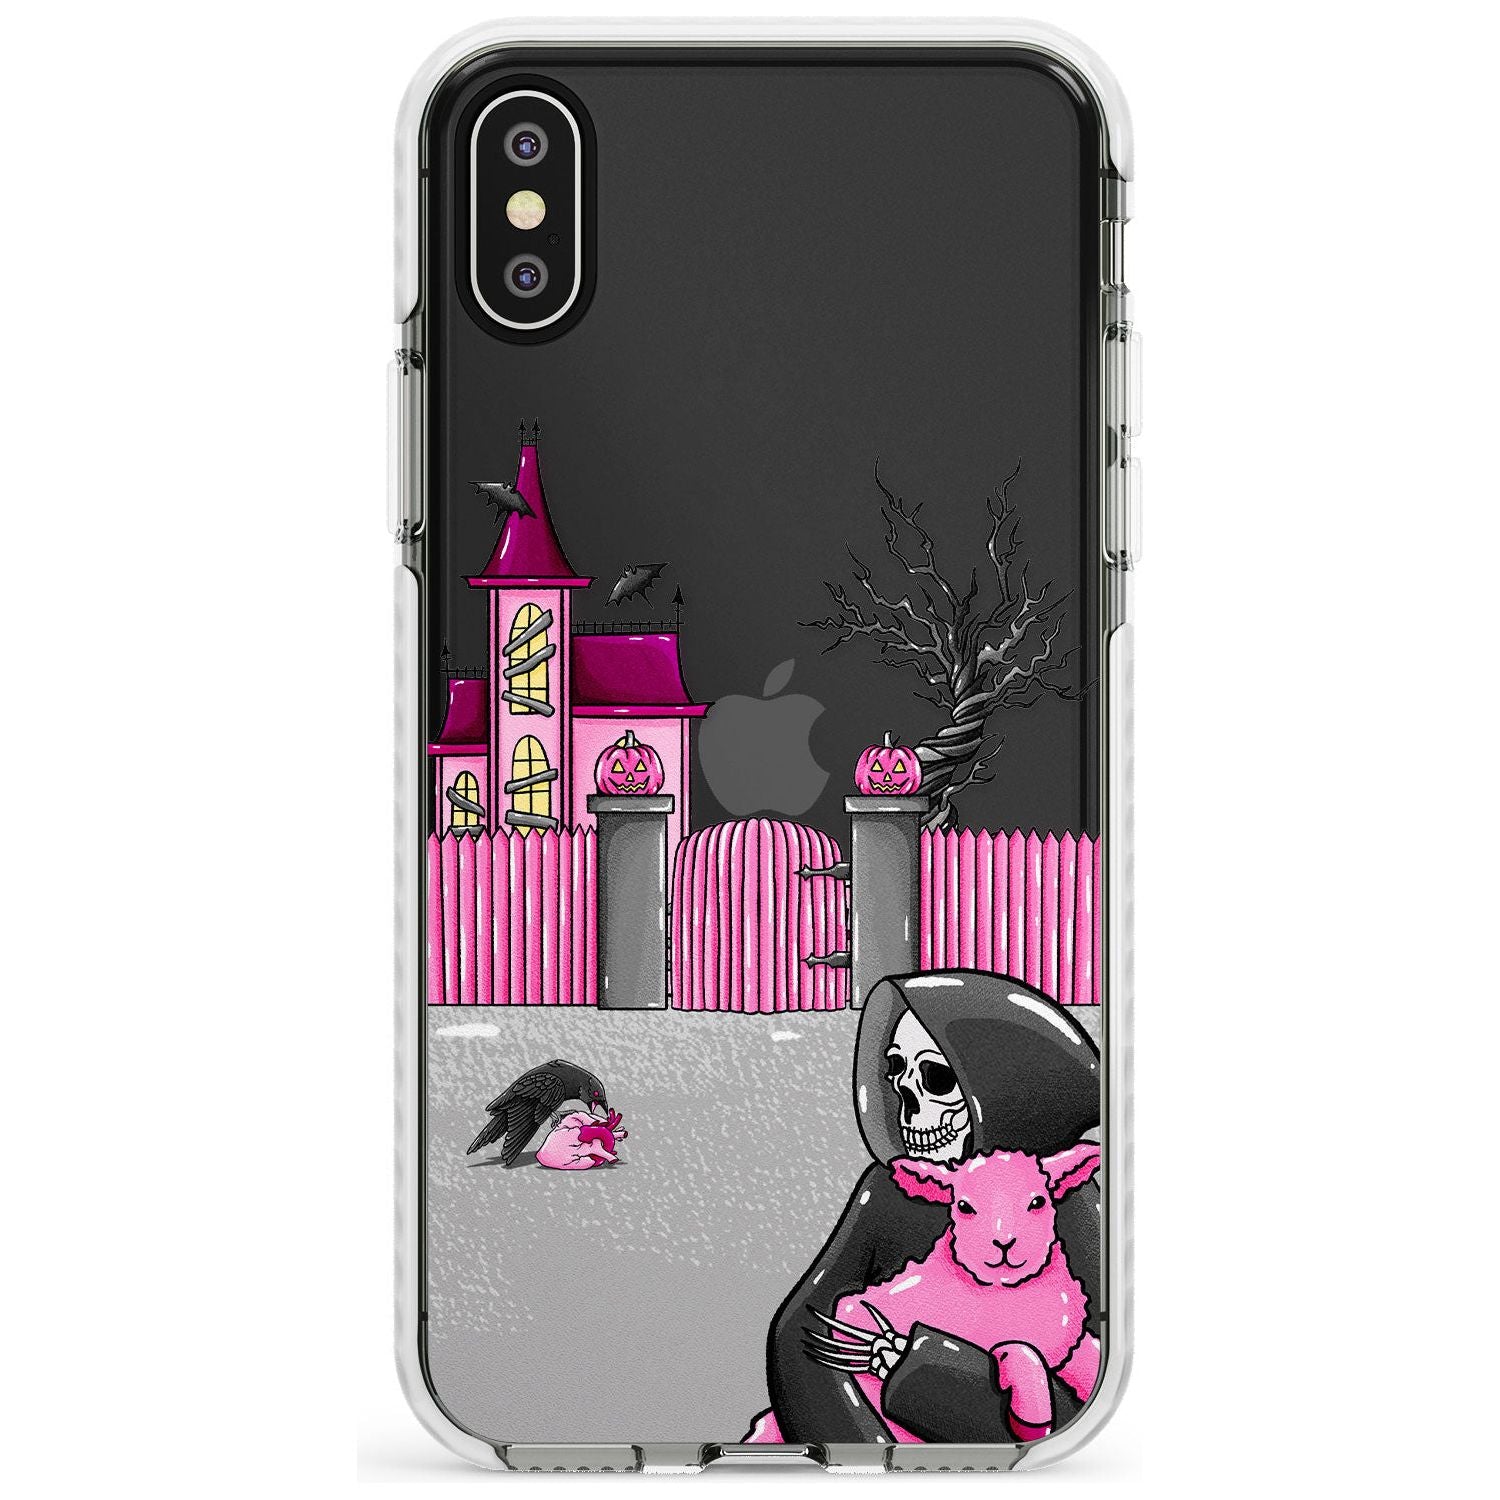 Left With My Heart Impact Phone Case for iPhone X XS Max XR